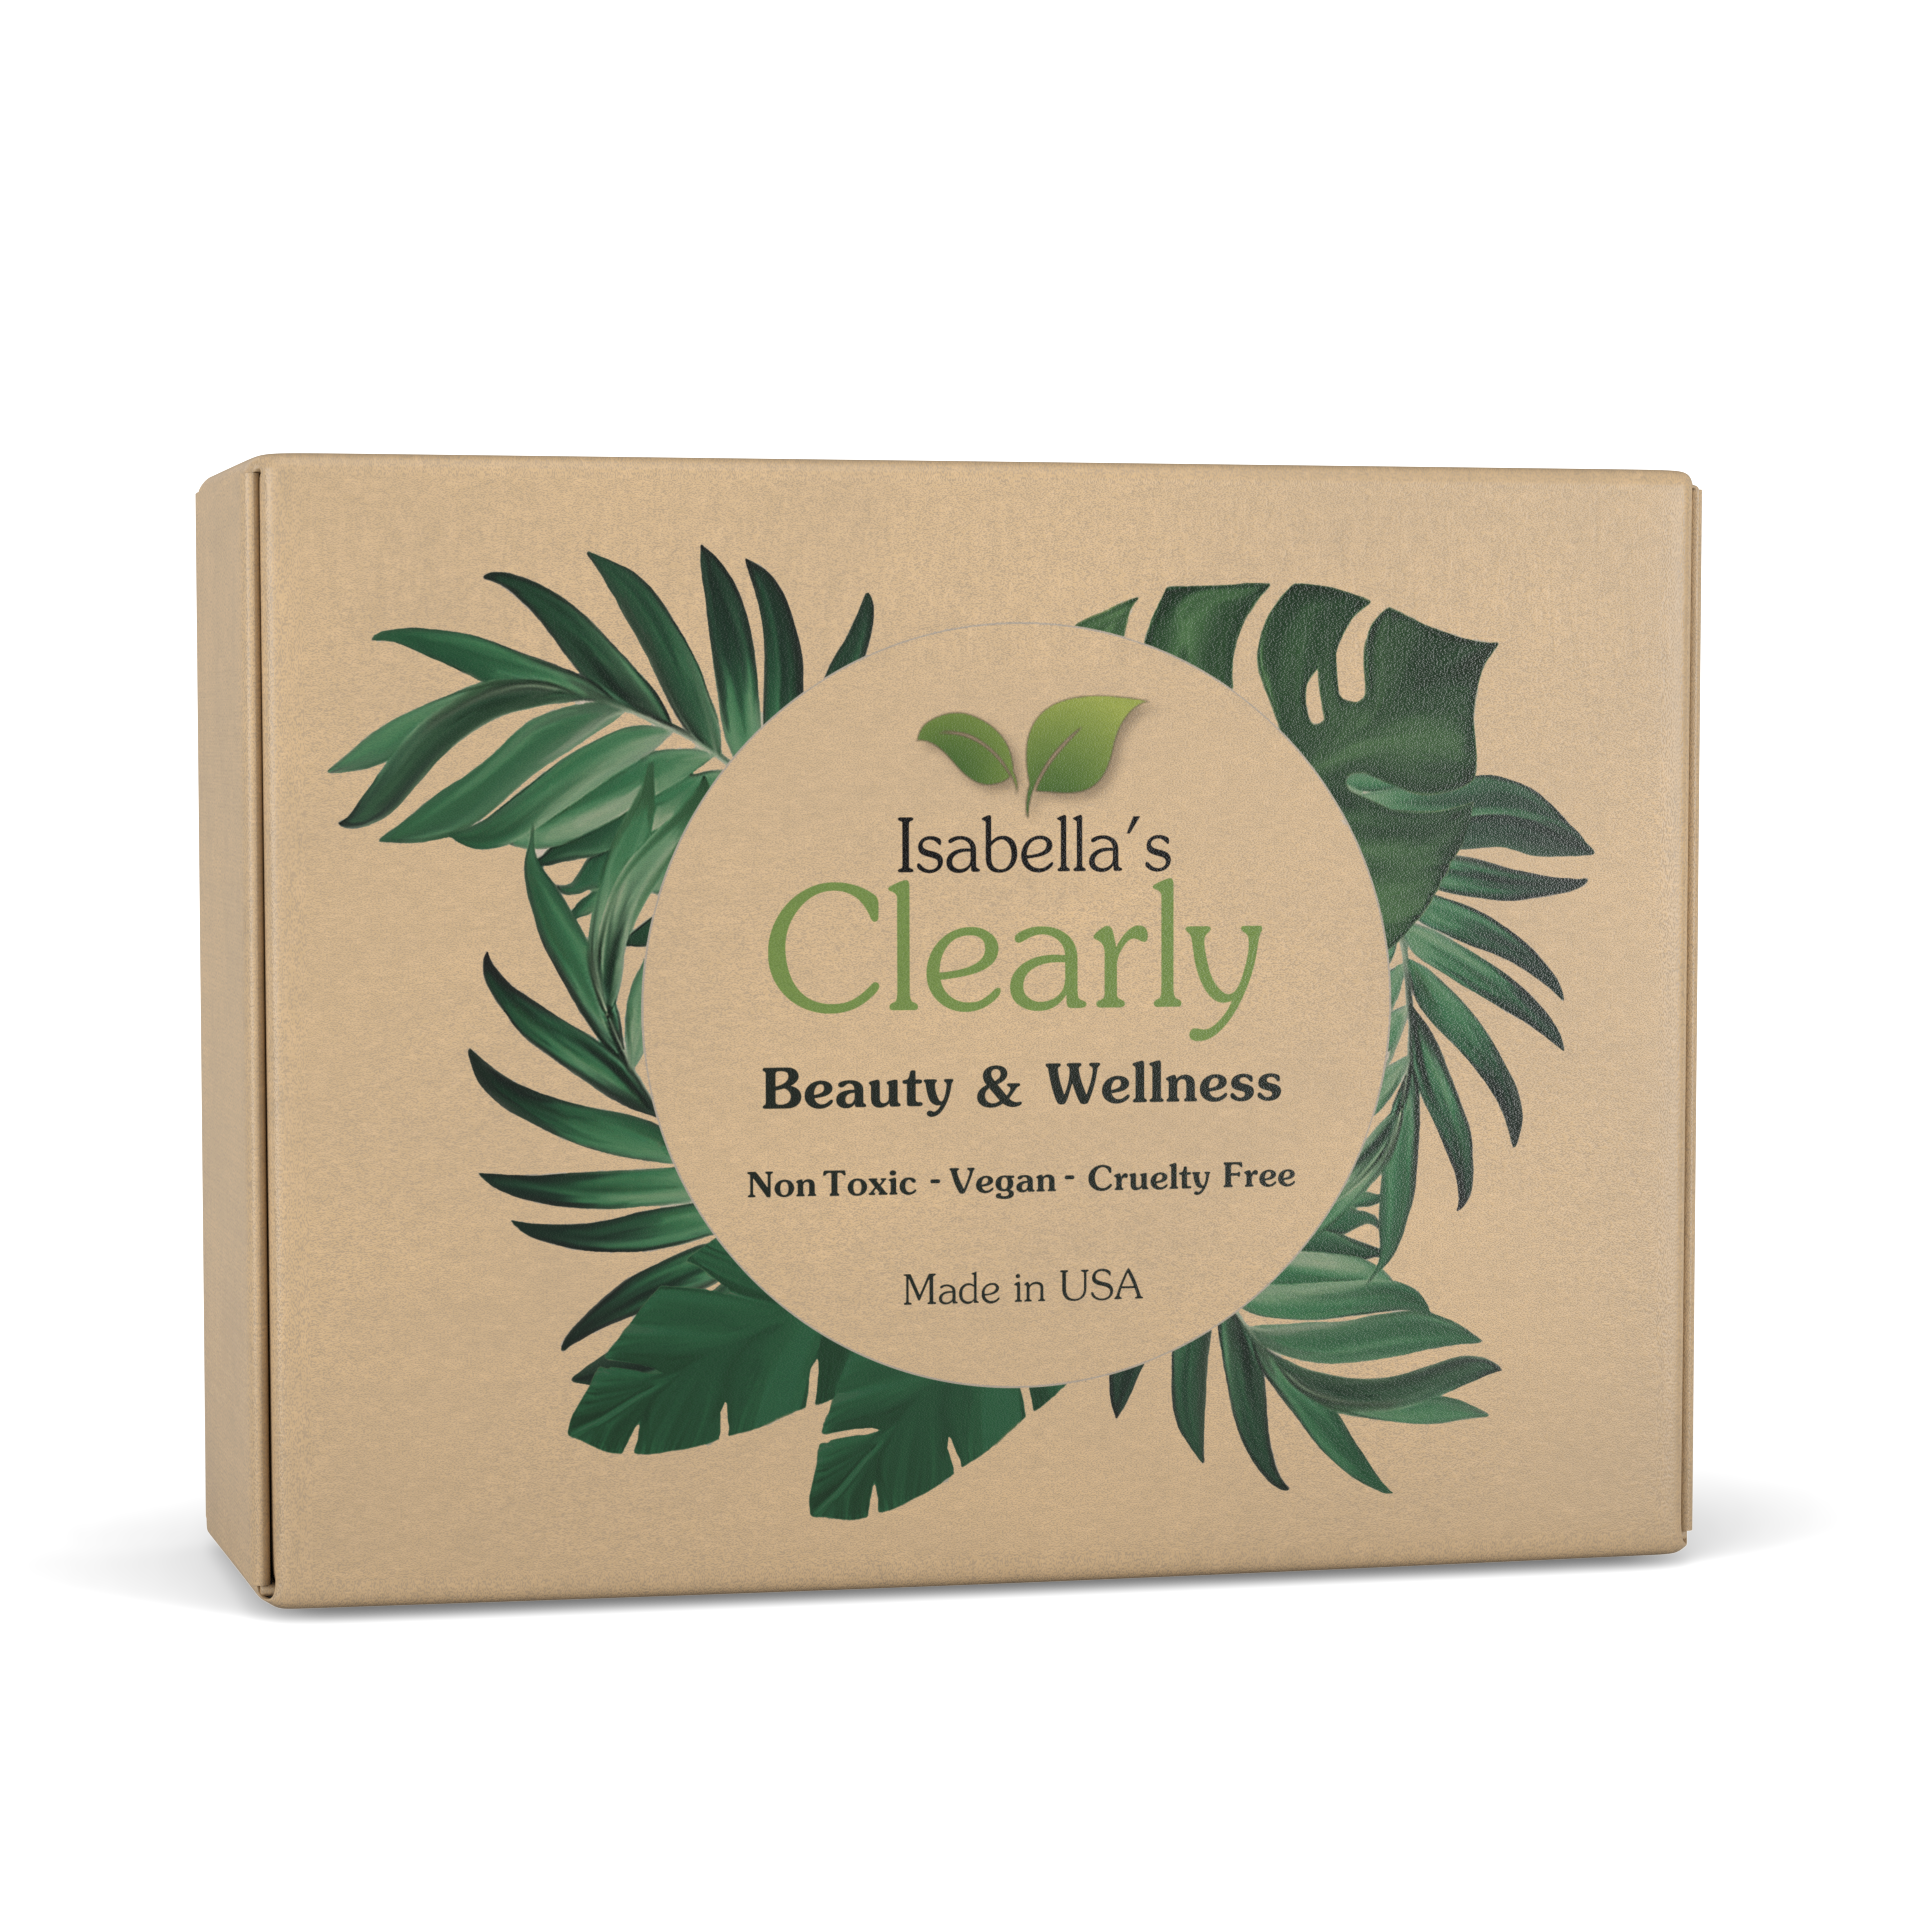 Clearly Teen, Clean Beauty Box For Skin And Hair